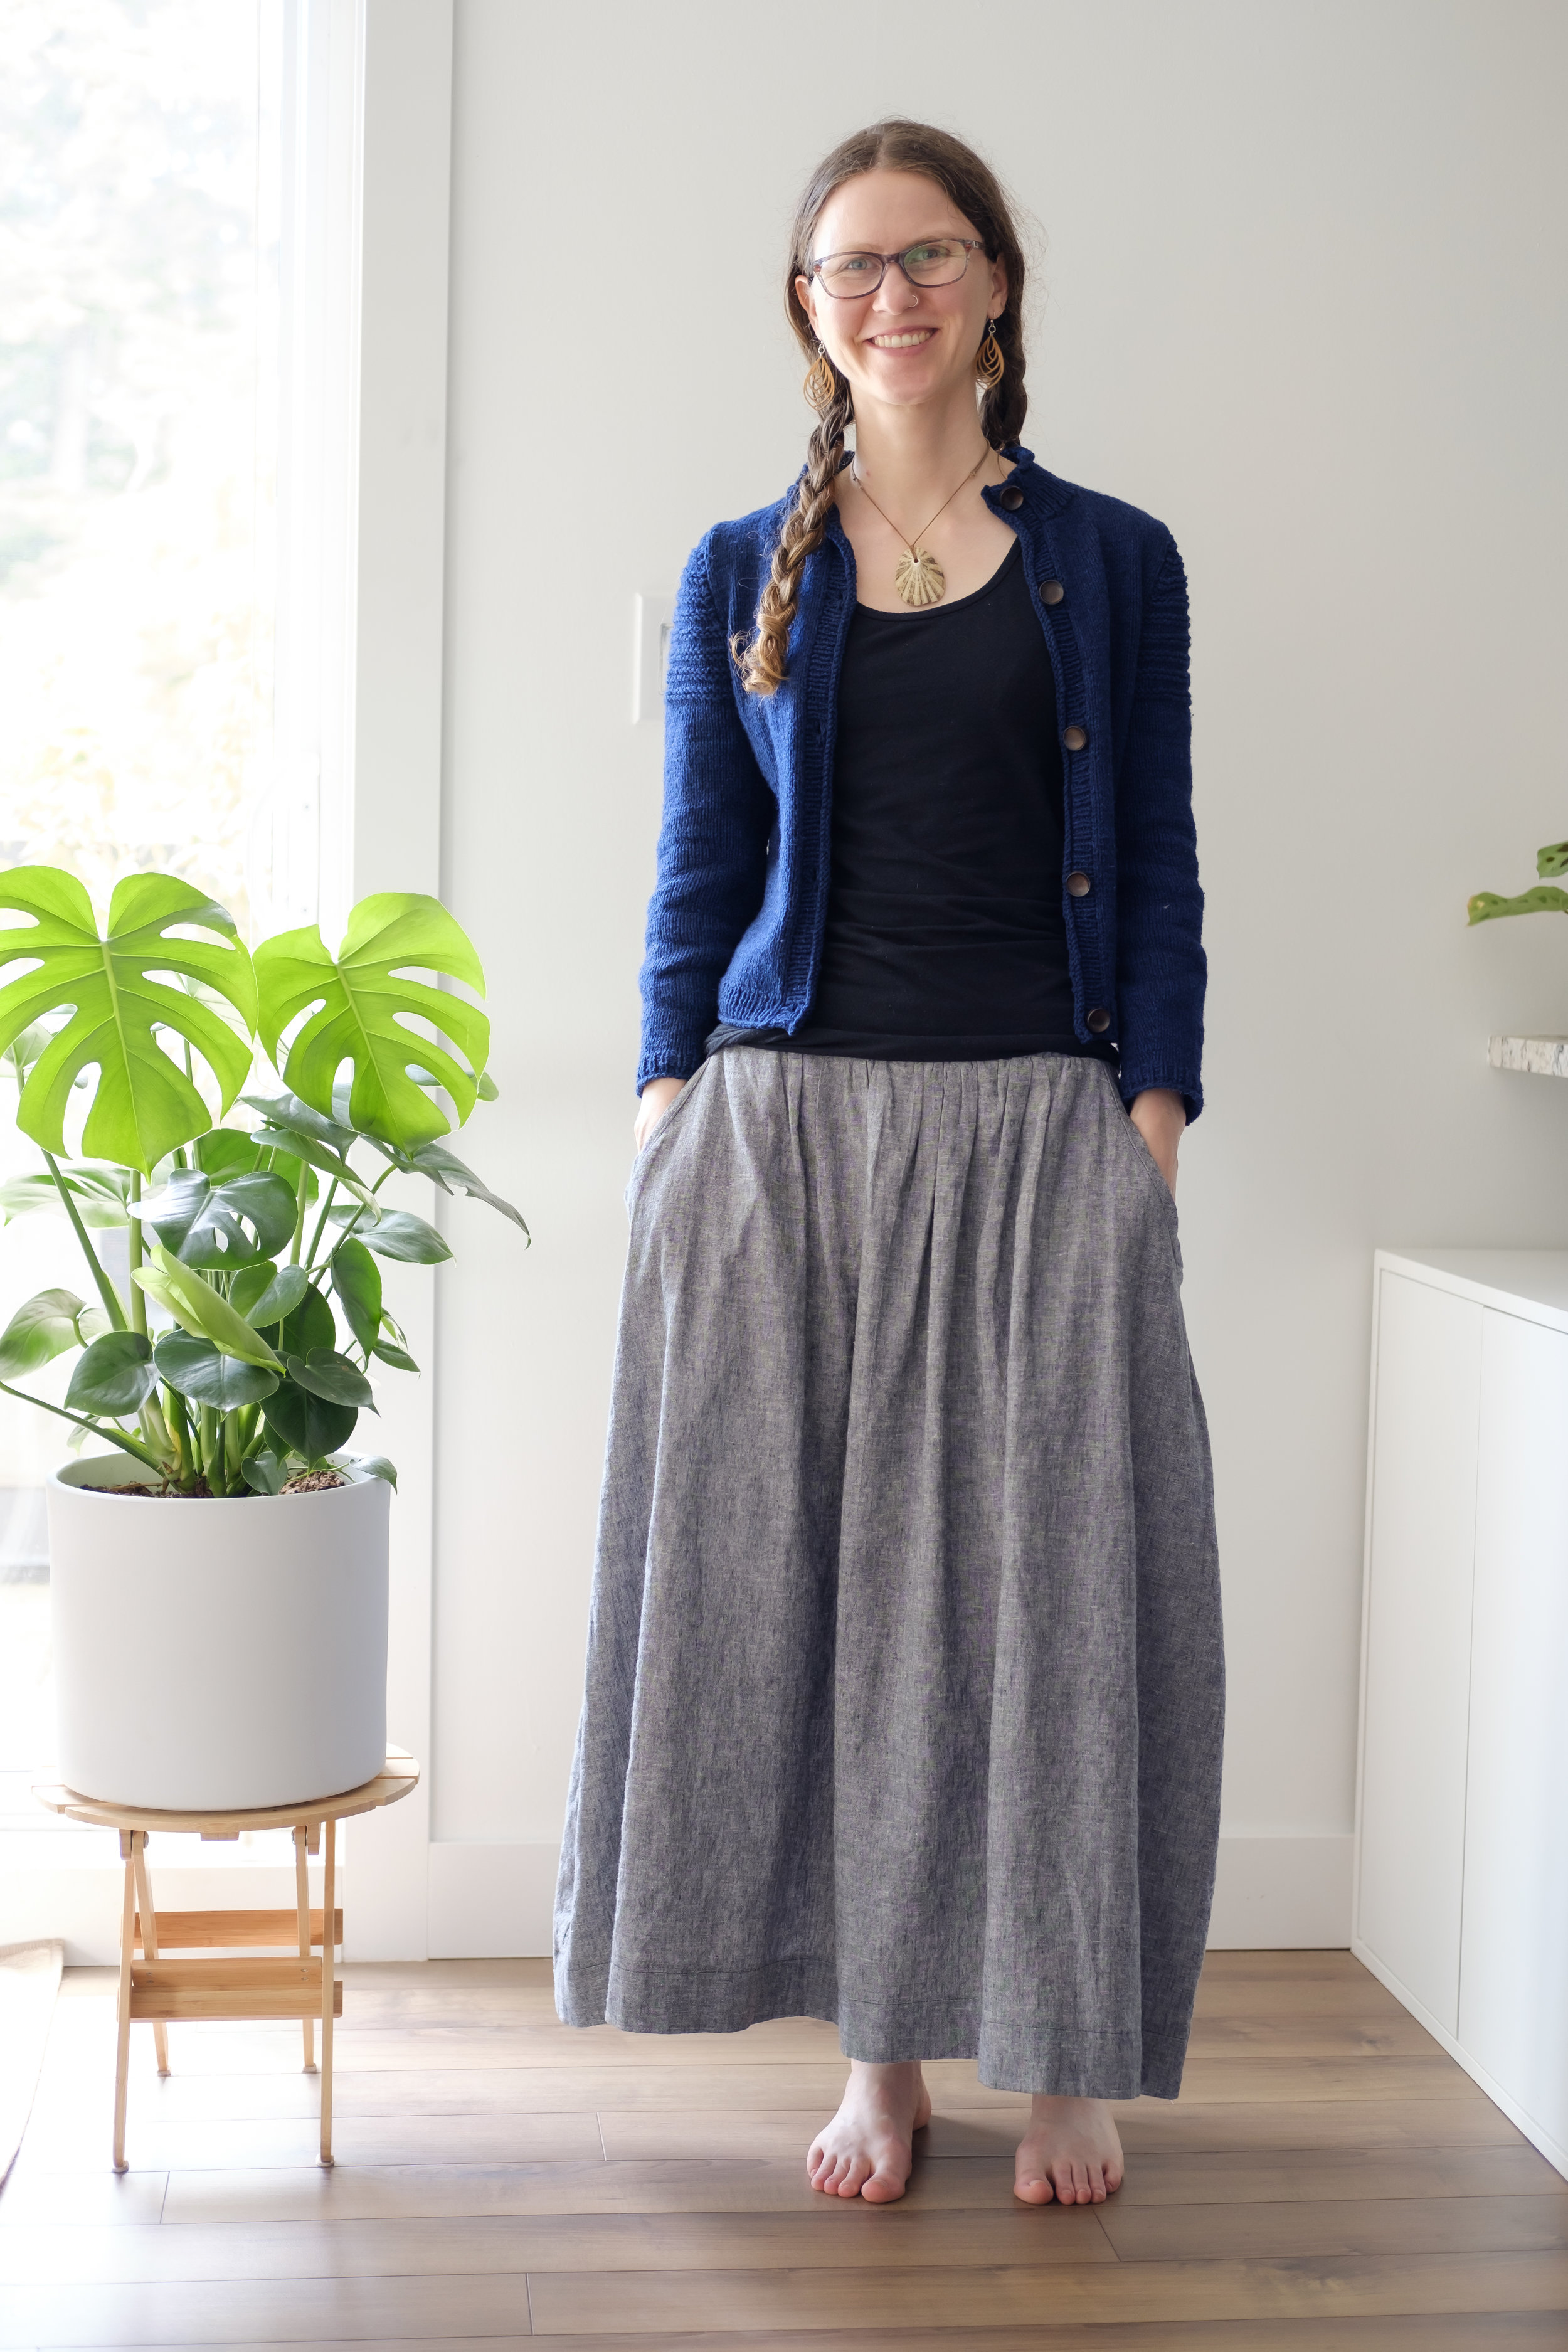 How to style a long maxi skirt for any occasion - Quora